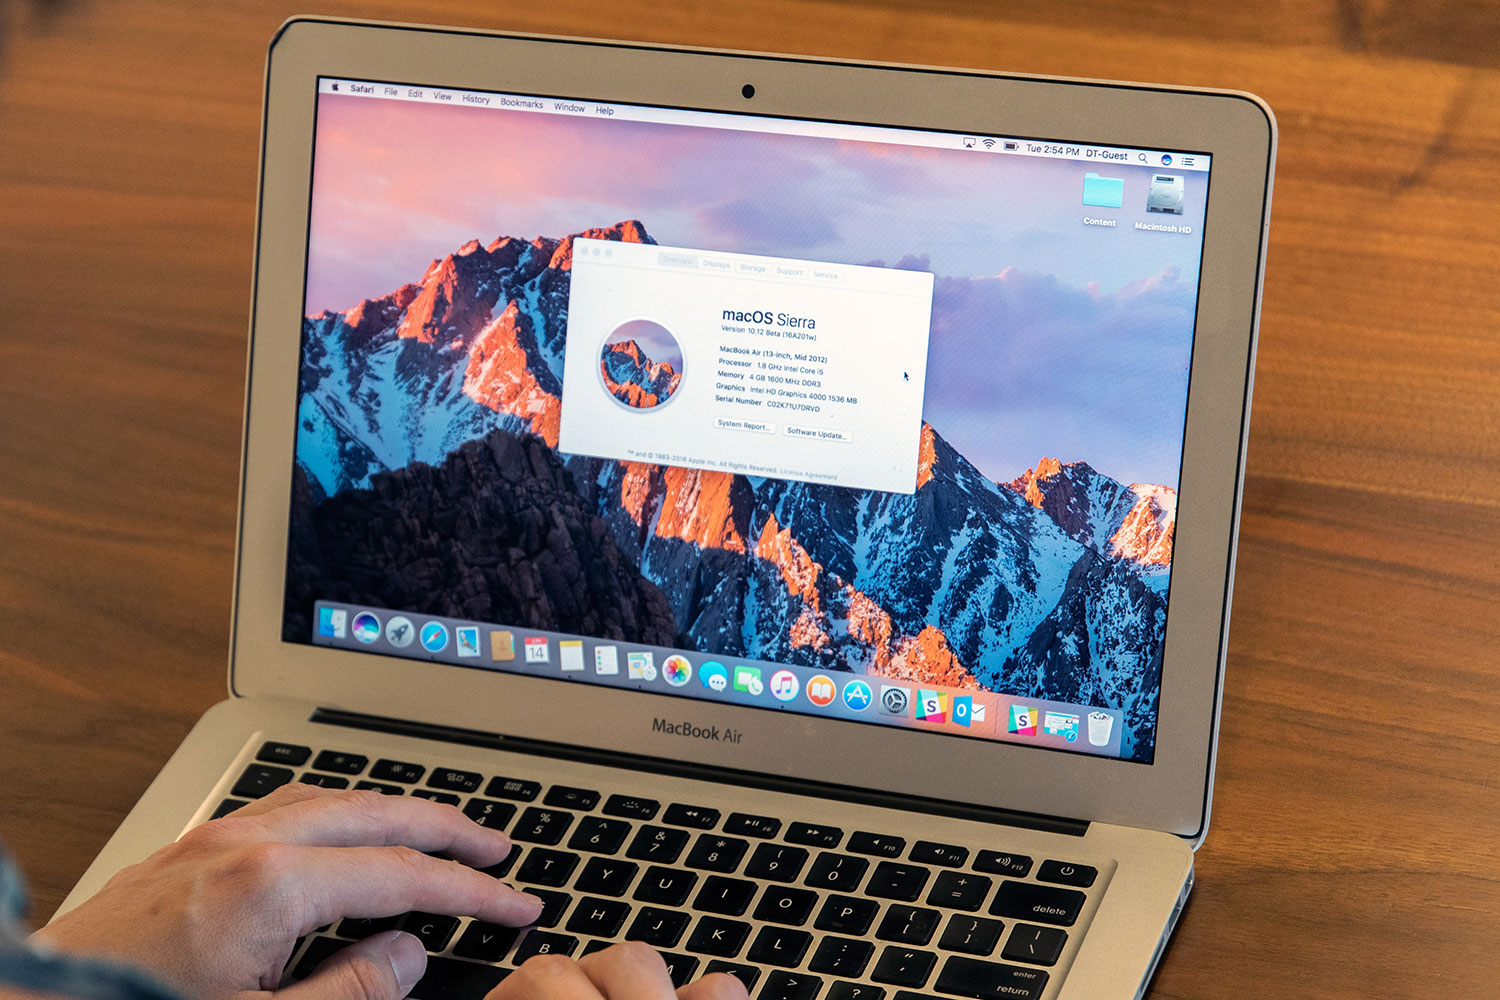 macos sierra open source darwin available download features 4